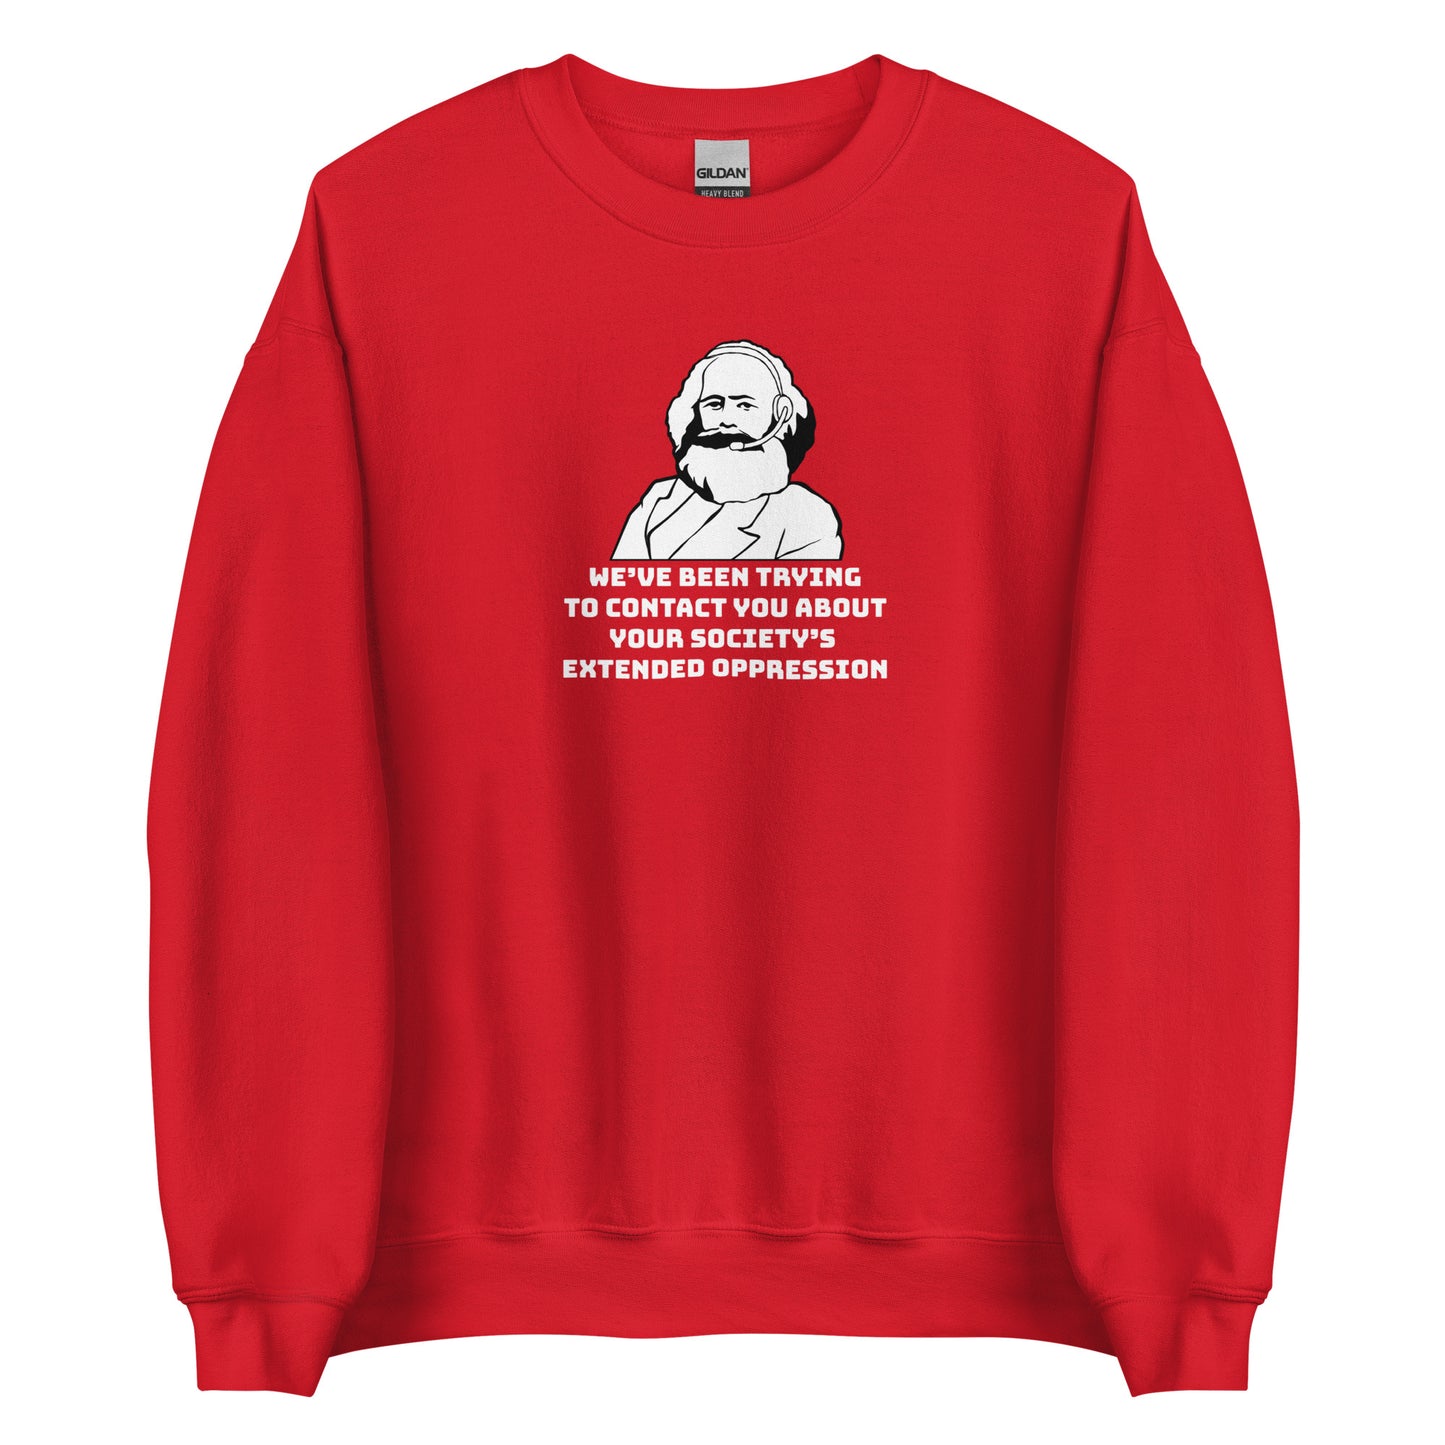 A red crewneck sweatshirt featuring a black and white illustration of Karl Marx wearing a telemarketer headset. Text beneath Marx reads "We've been trying to contact you about your society's extended oppression." in a blocky font.